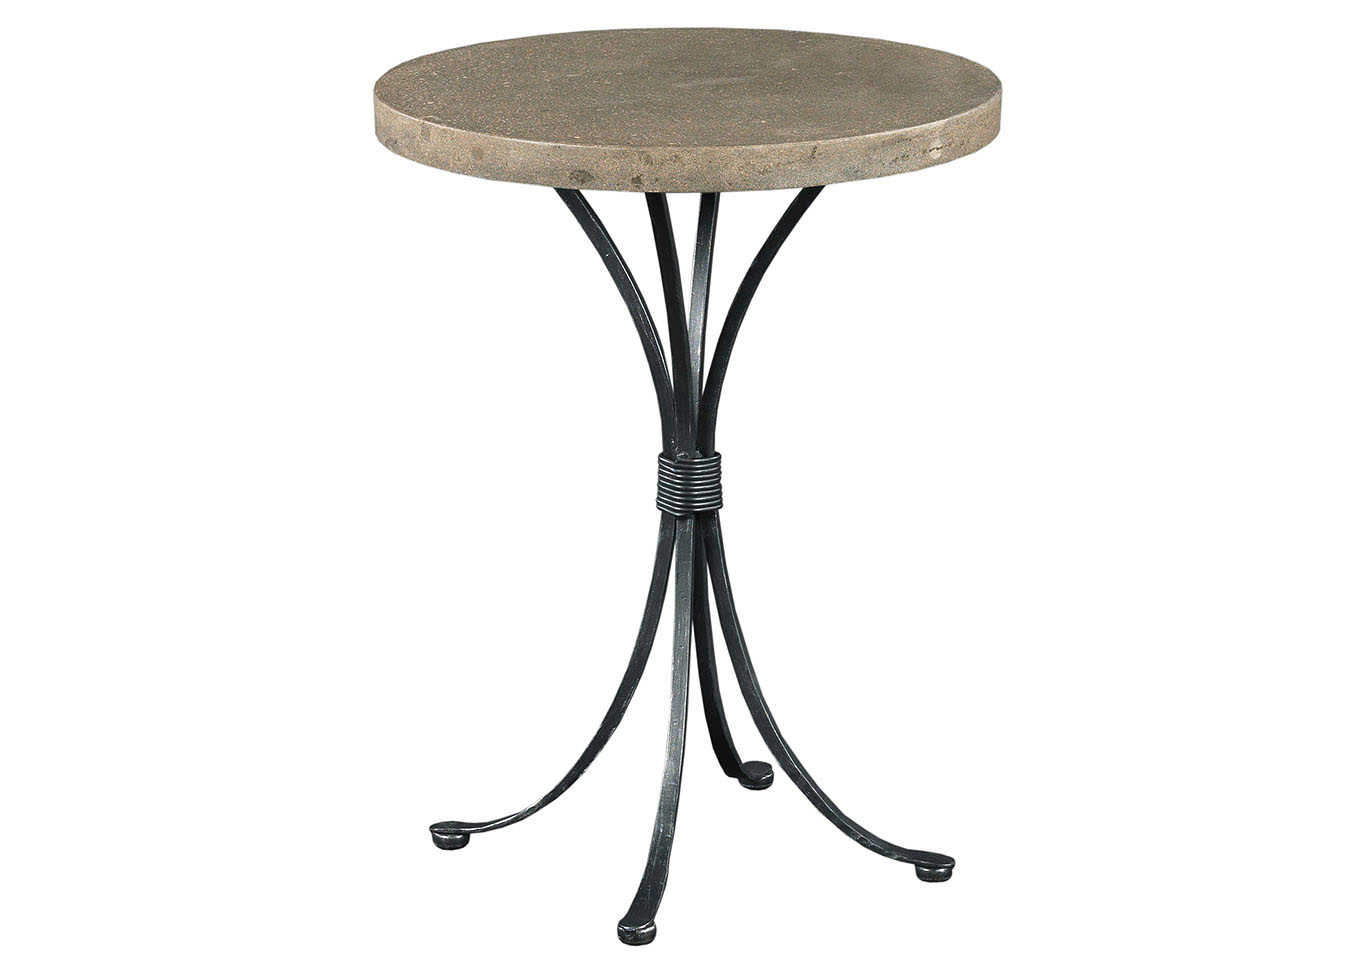 Modern Classics Metal Round Accent Table,Kincaid